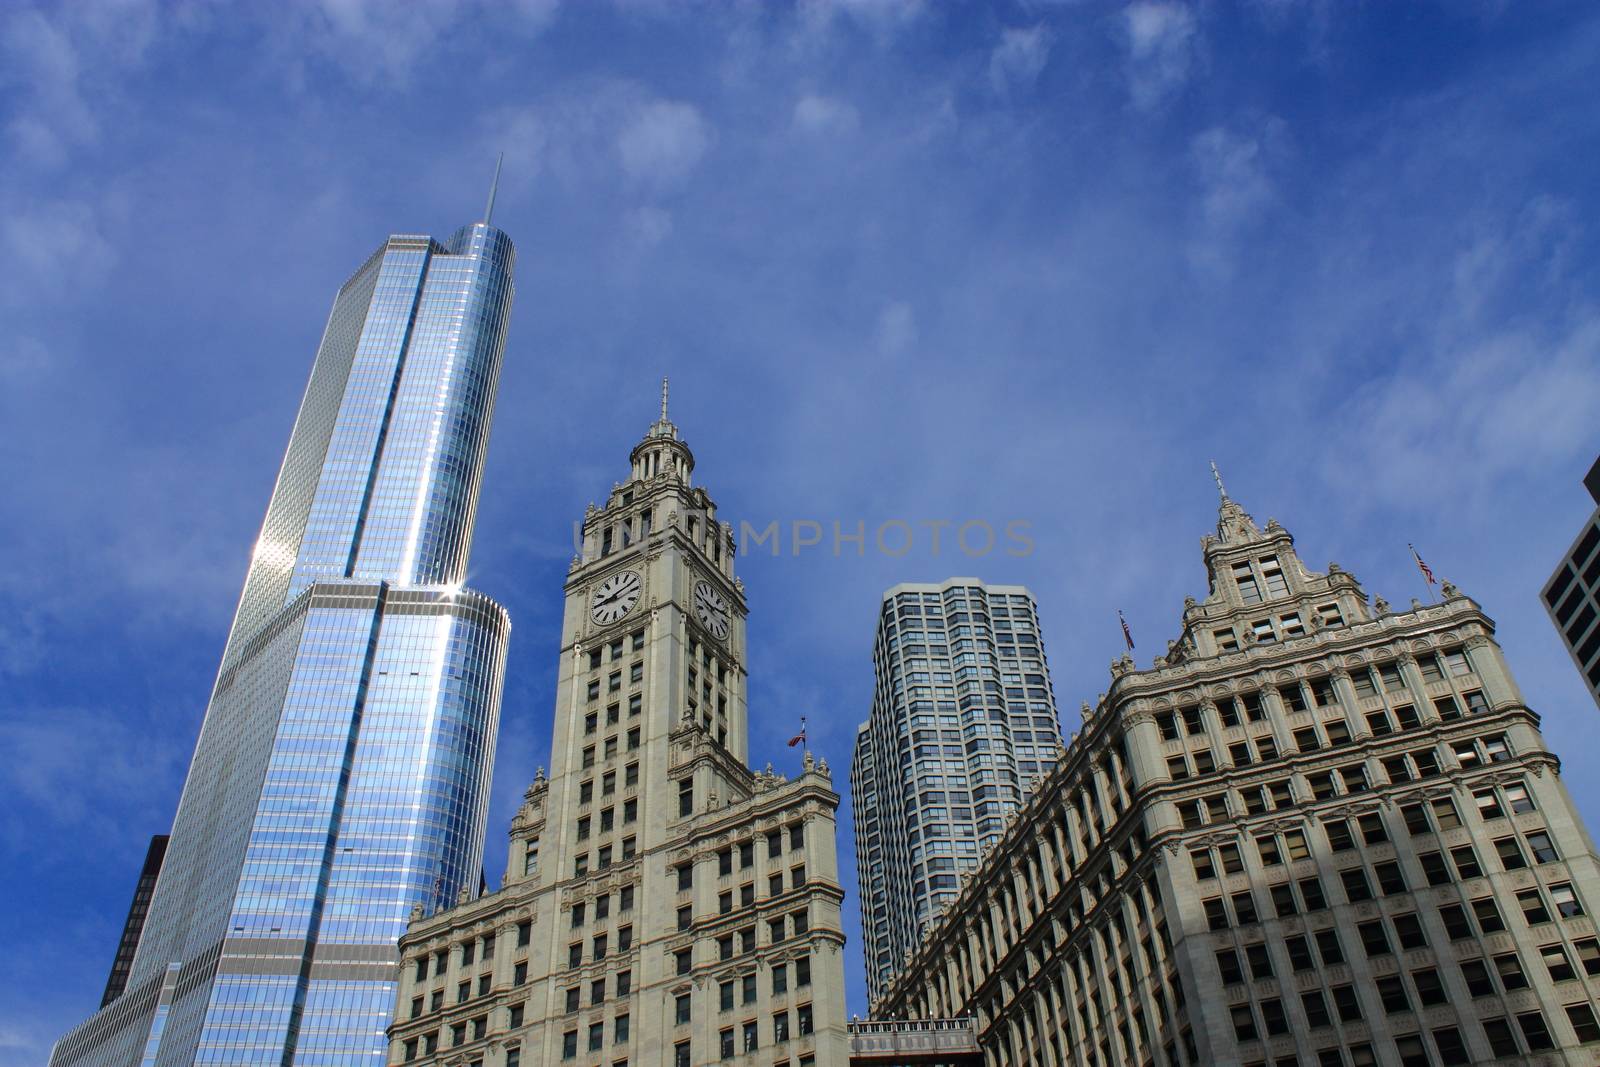 Wrigley Building and Trump Tower in Chicago, Illinois.